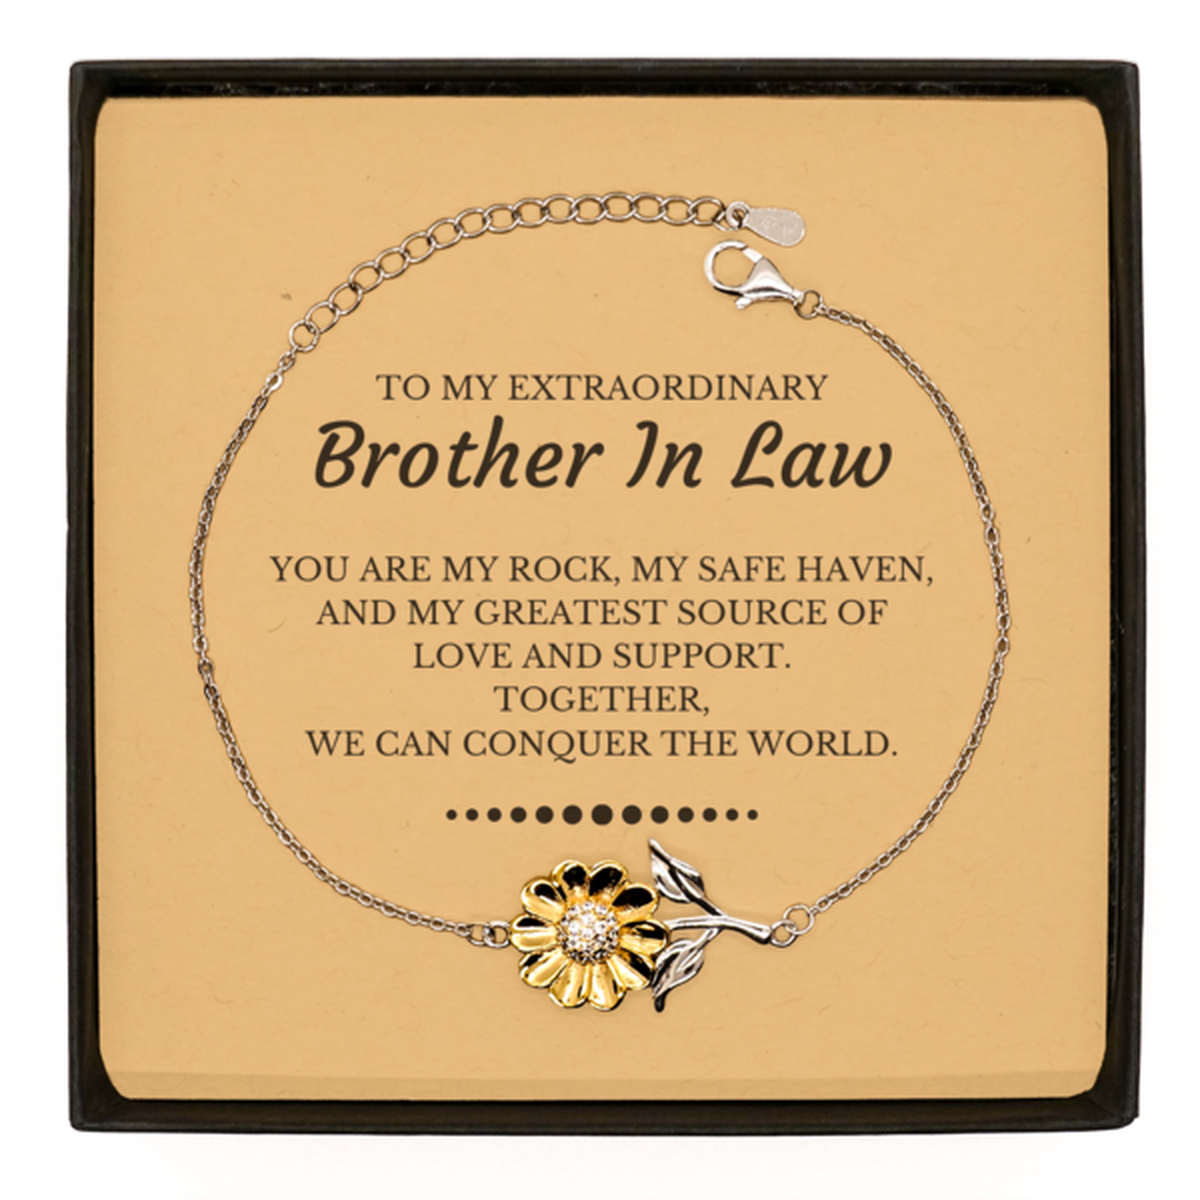 To My Extraordinary Brother In Law Gifts, Together, we can conquer the world, Birthday Sunflower Bracelet For Brother In Law, Christmas Gifts For Brother In Law